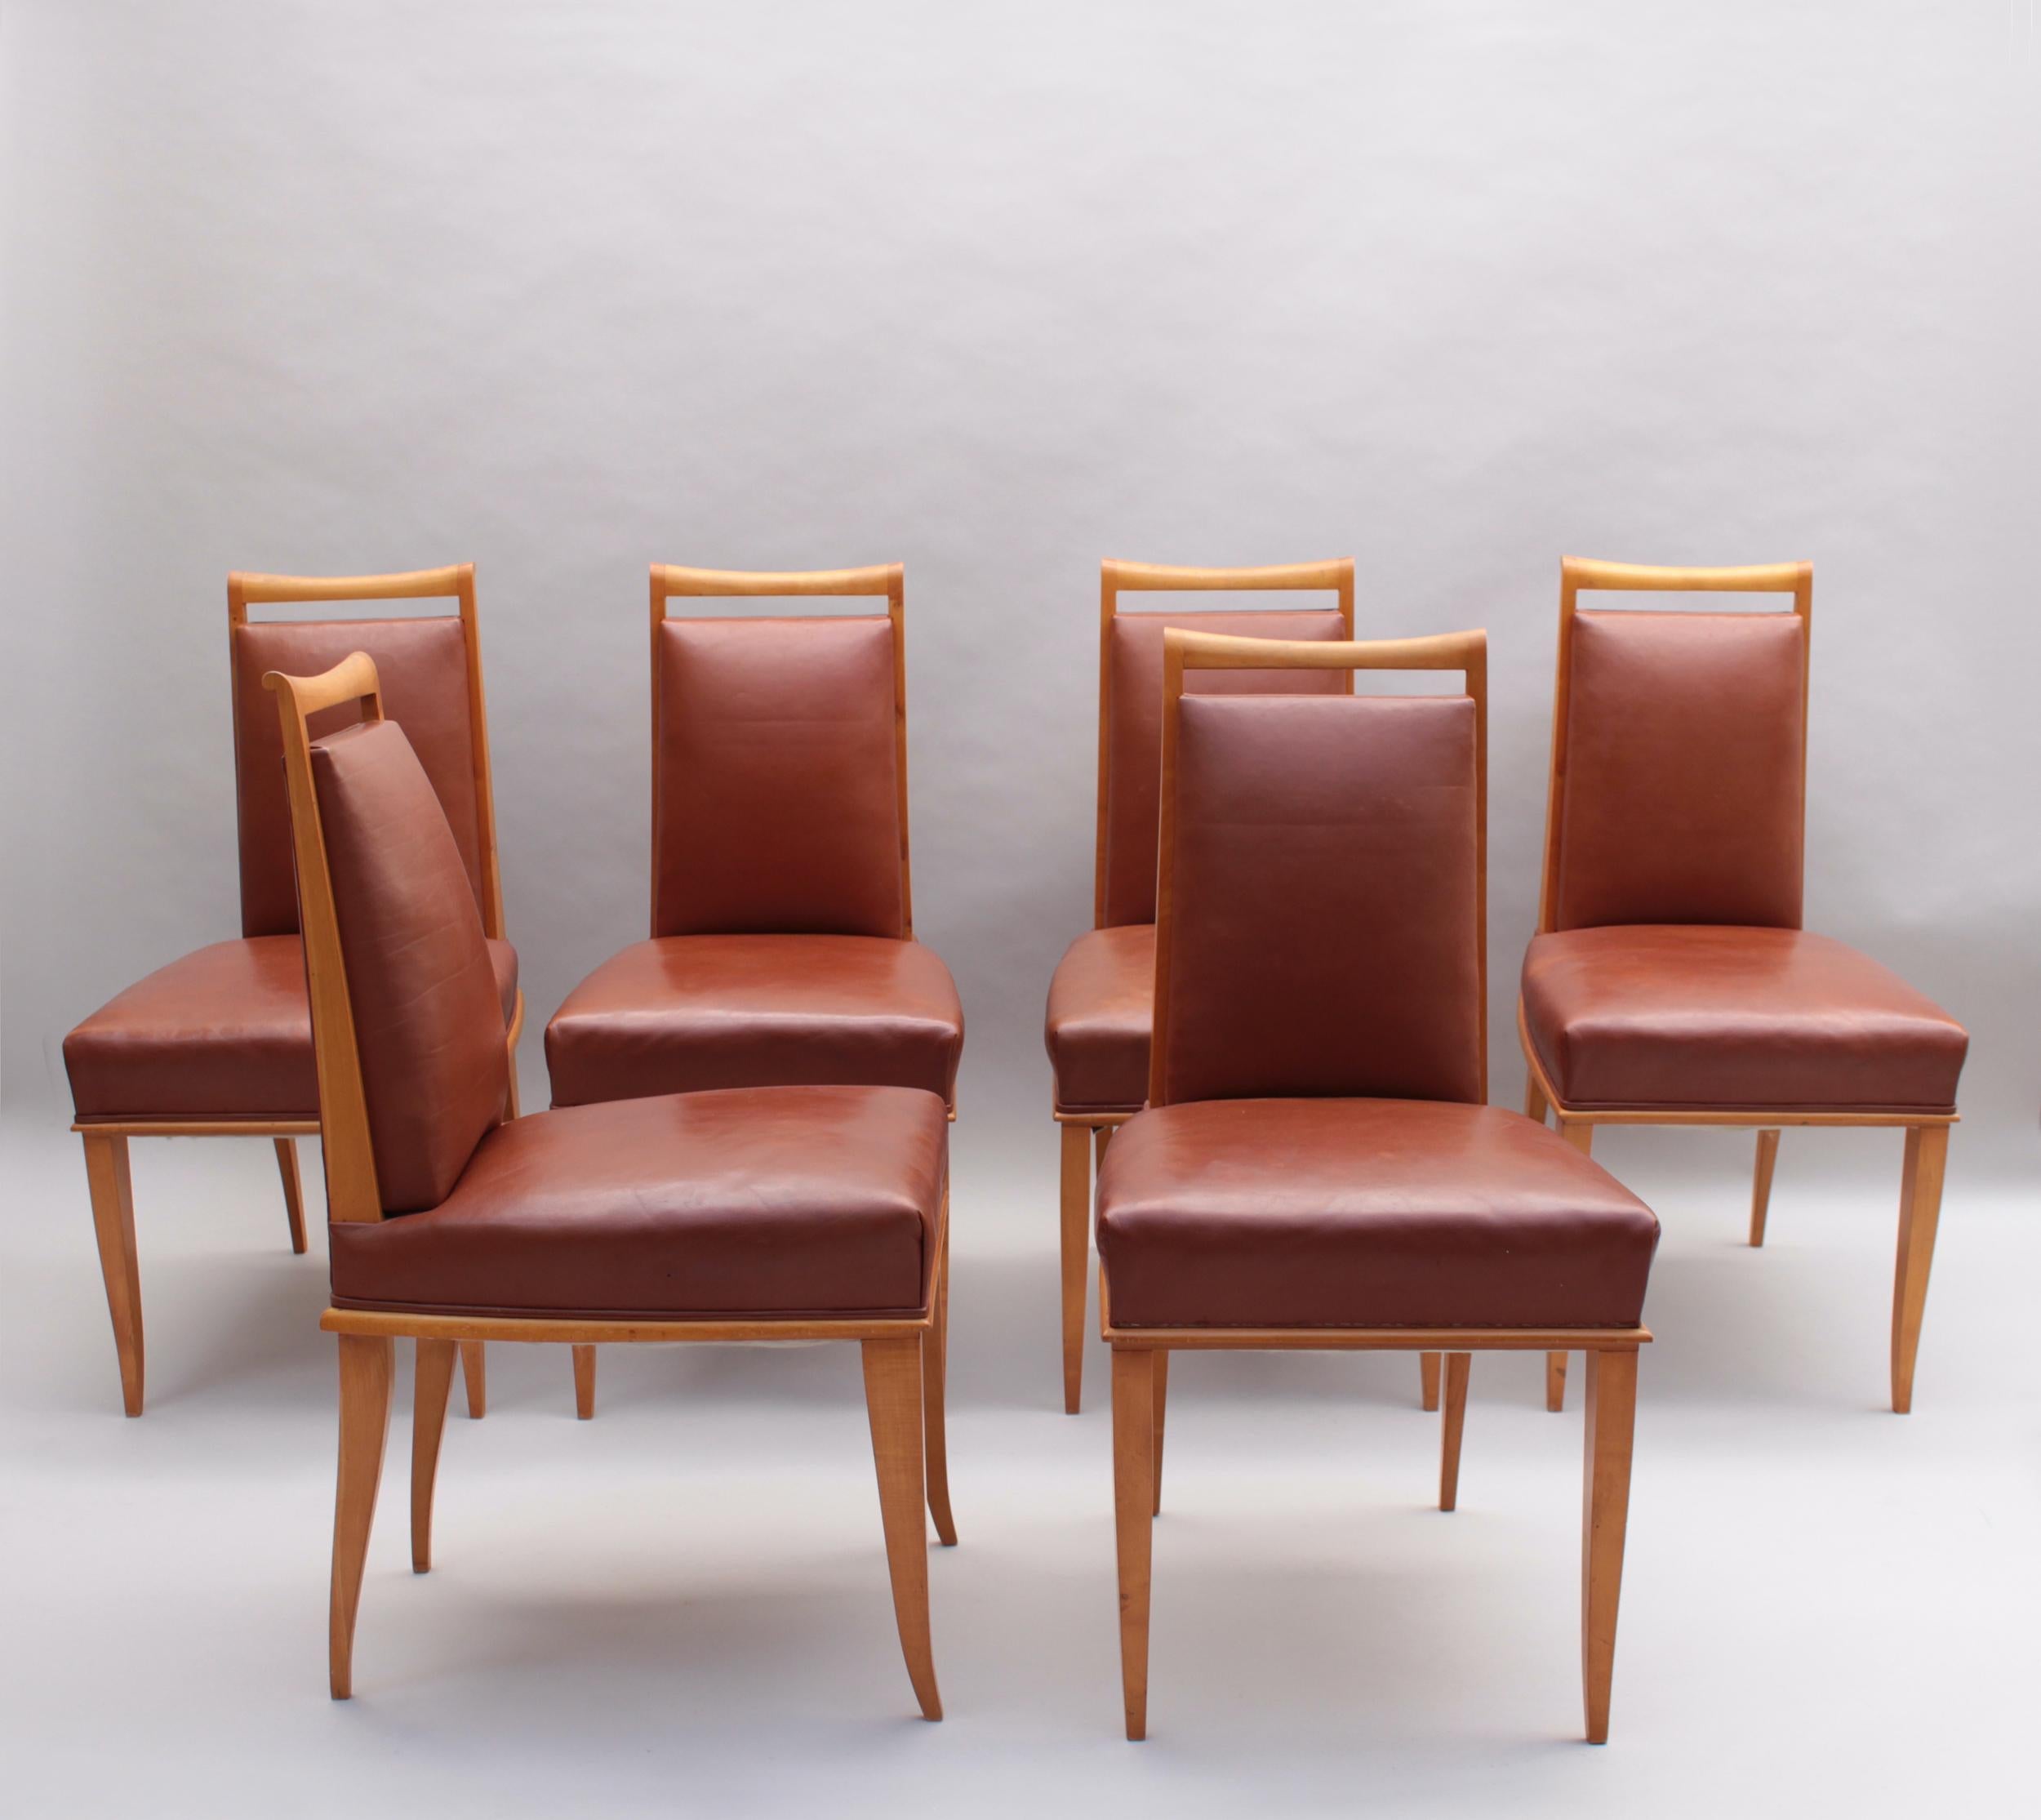 Etienne-Henri Martin - A set of 6 fine French 1930s dining chairs in solid sycamore with their original leather upholstery.
Documented